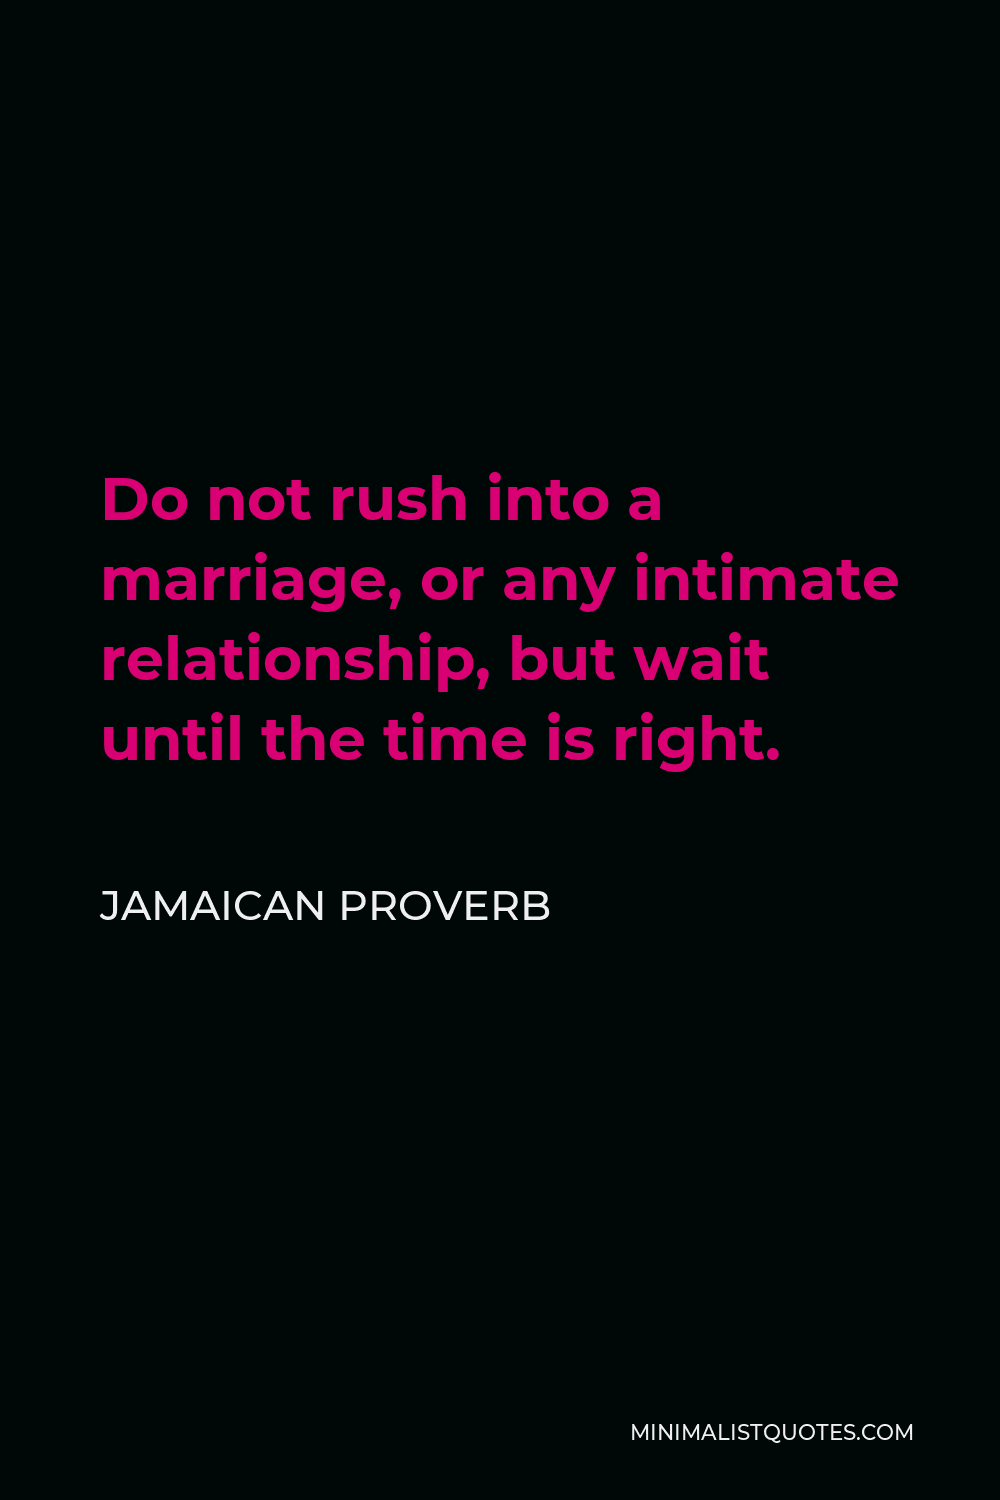 Jamaican Proverb Quote - Do not rush into a marriage, or any intimate relationship, but wait until the time is right.